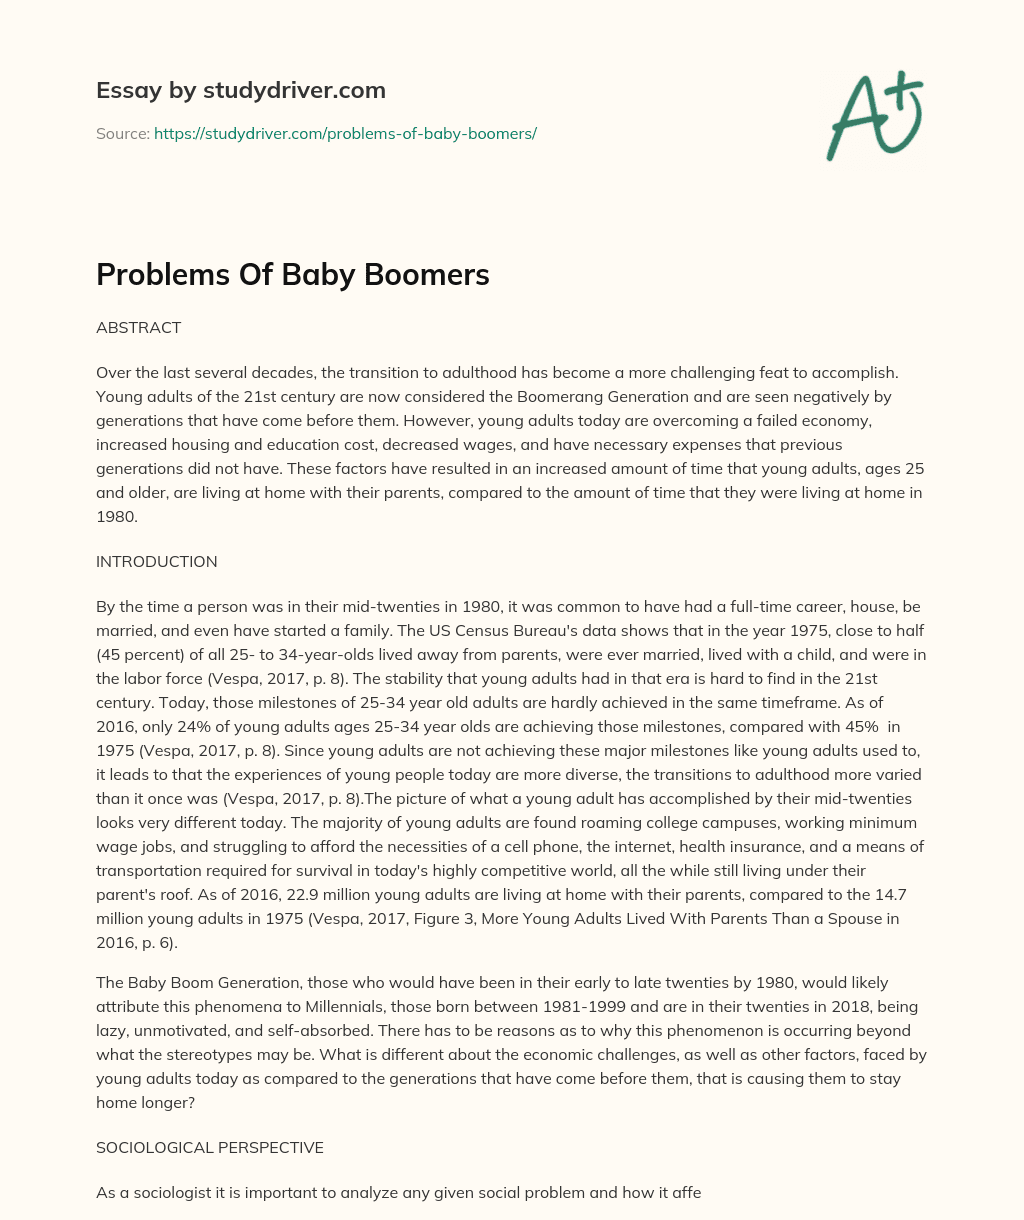 Problems of Baby Boomers essay